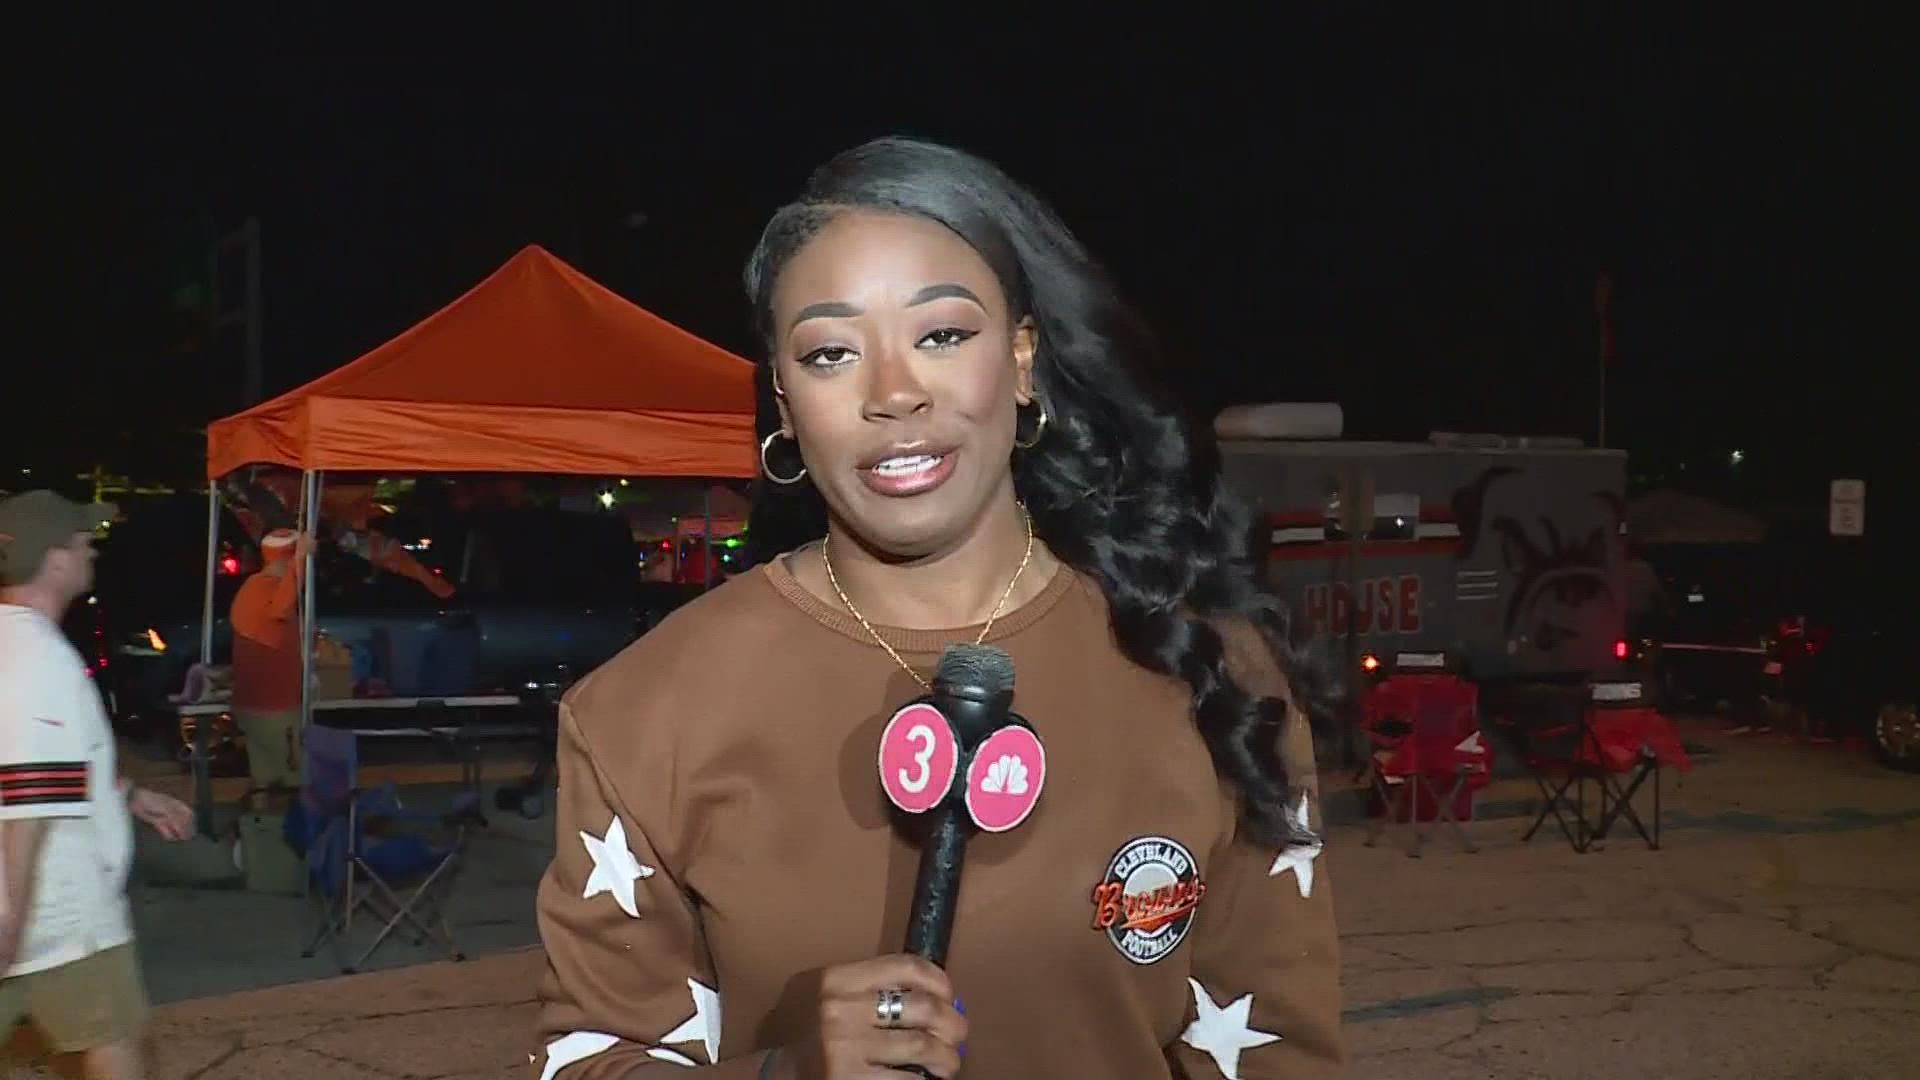 3News' Kierra Cotton visited the Muni Lot ahead of the Cleveland Browns' home opener at FirstEnergy